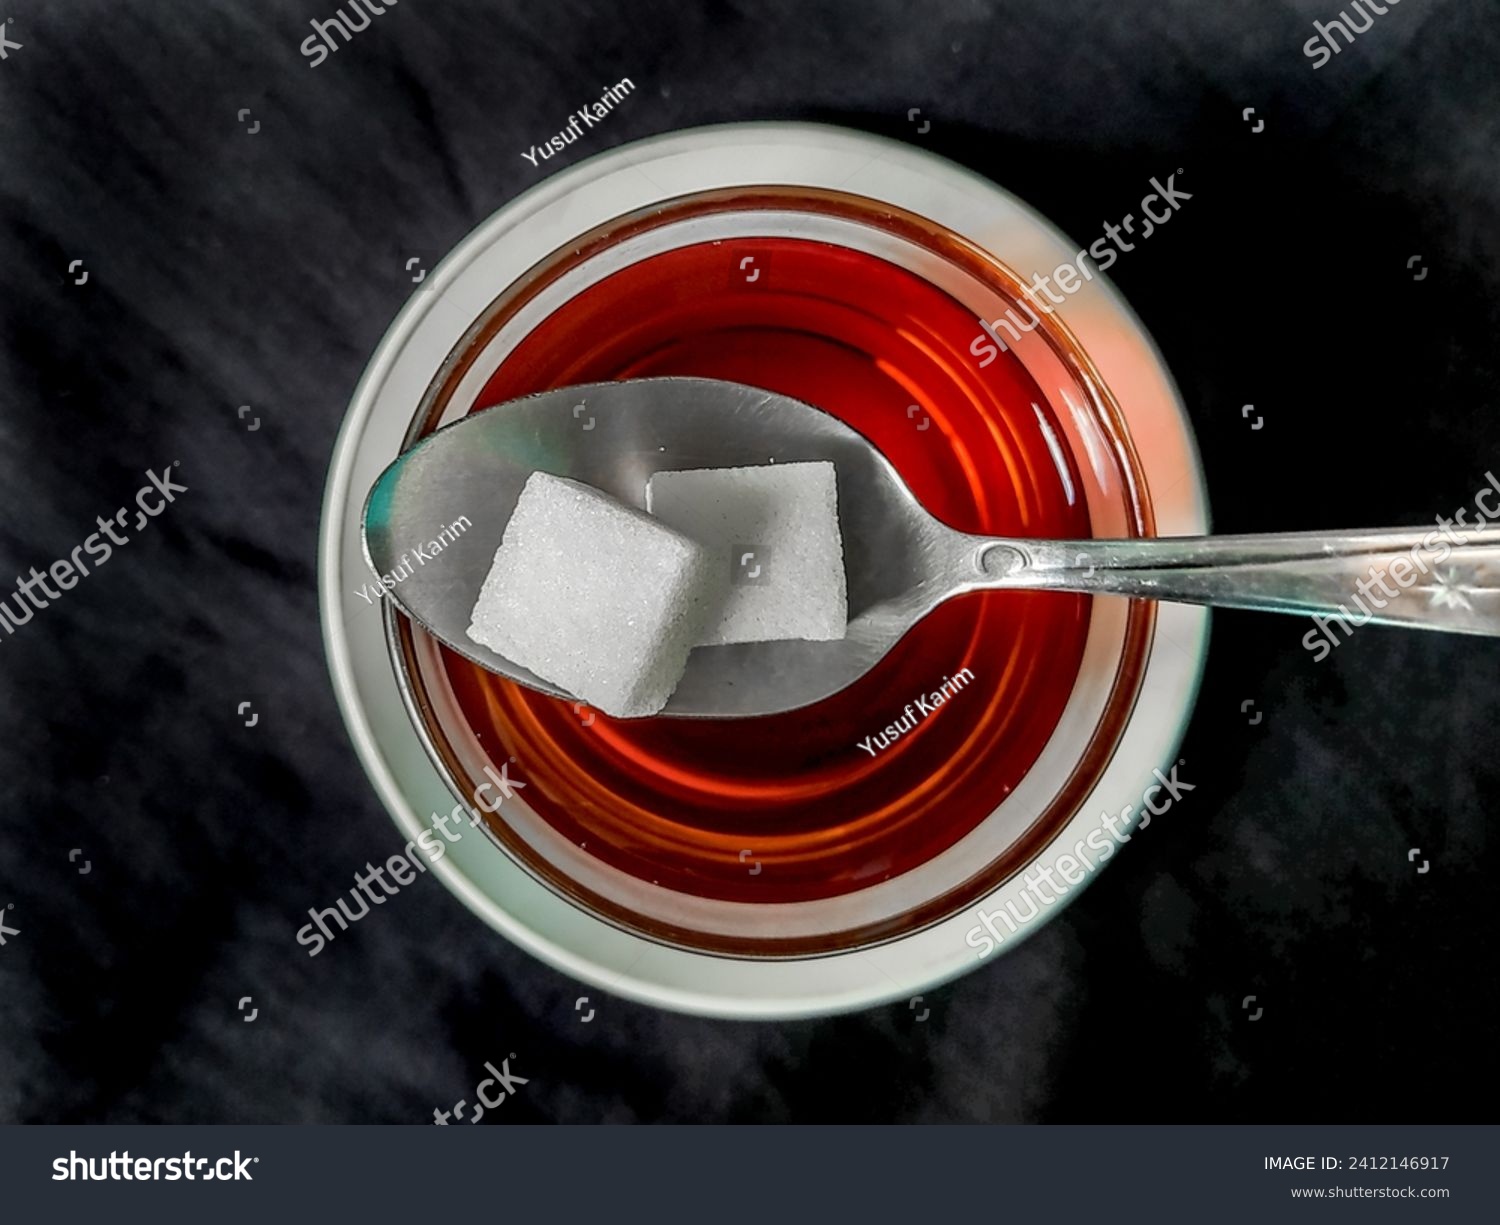 Sugar cubes on a teaspoon with a cup of tea on a black cloth background #2412146917